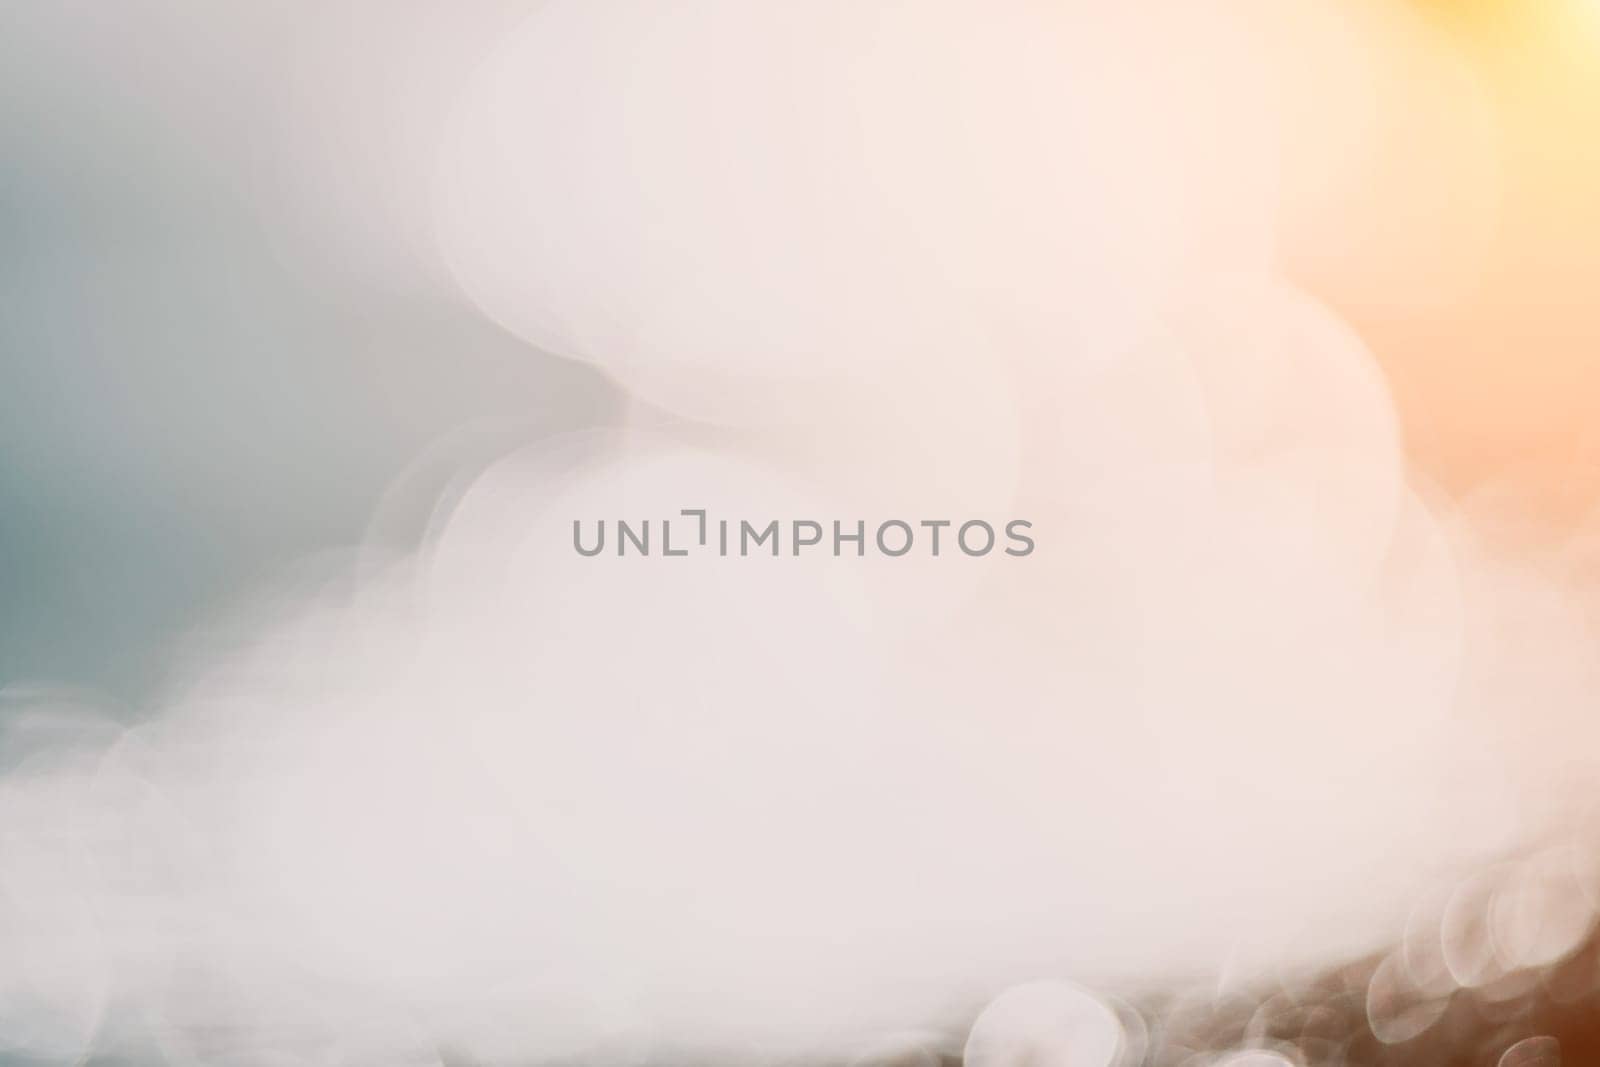 Abstract nature summer ocean sunset sea background. Small waves on water surface in motion blur with bokeh lights from sunrise. Holiday, vacation and recreational background concept. by panophotograph